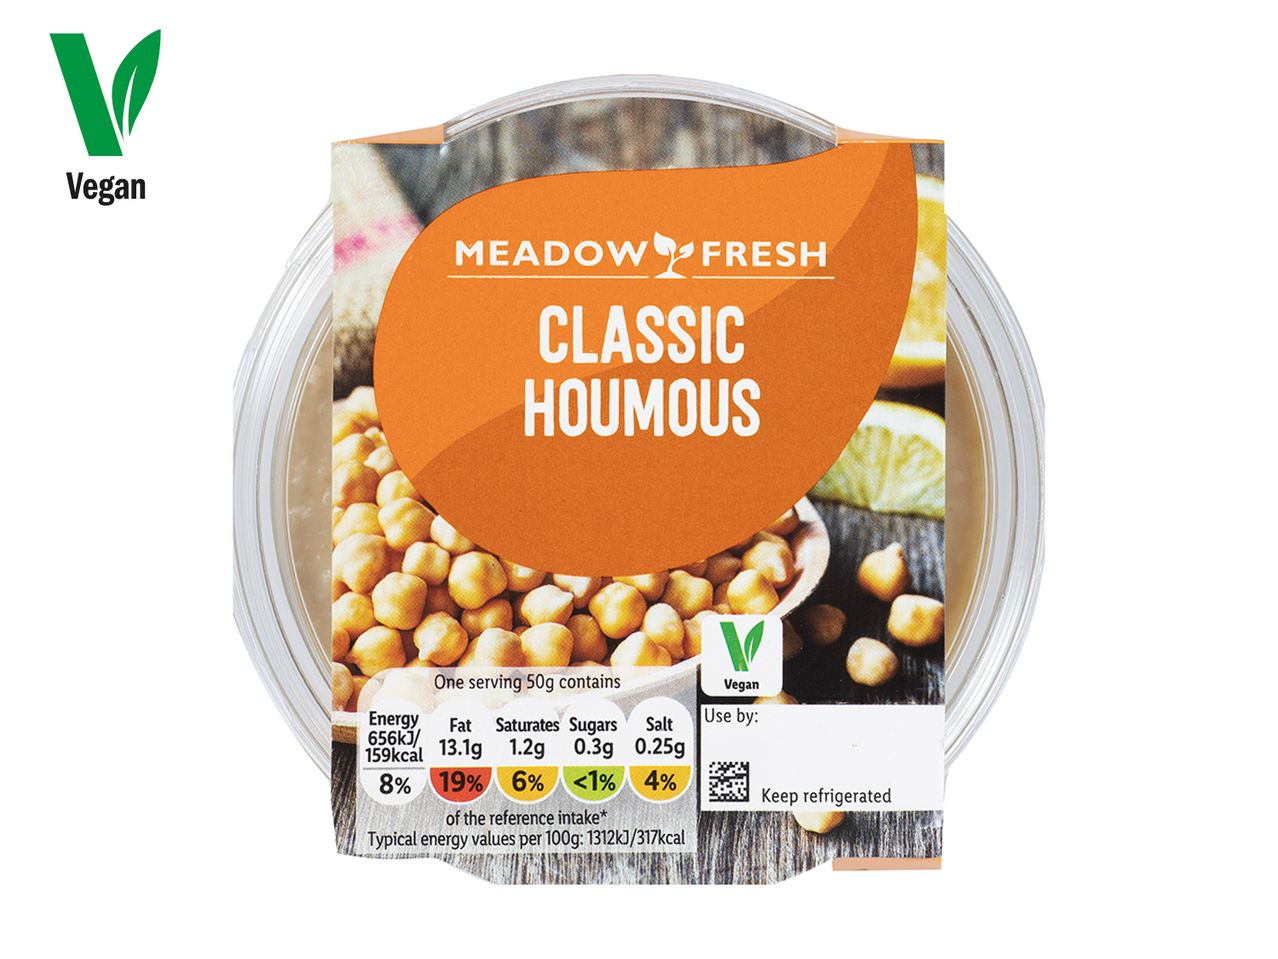 Go to full screen view: Meadow Fresh Classic Houmous - Image 1